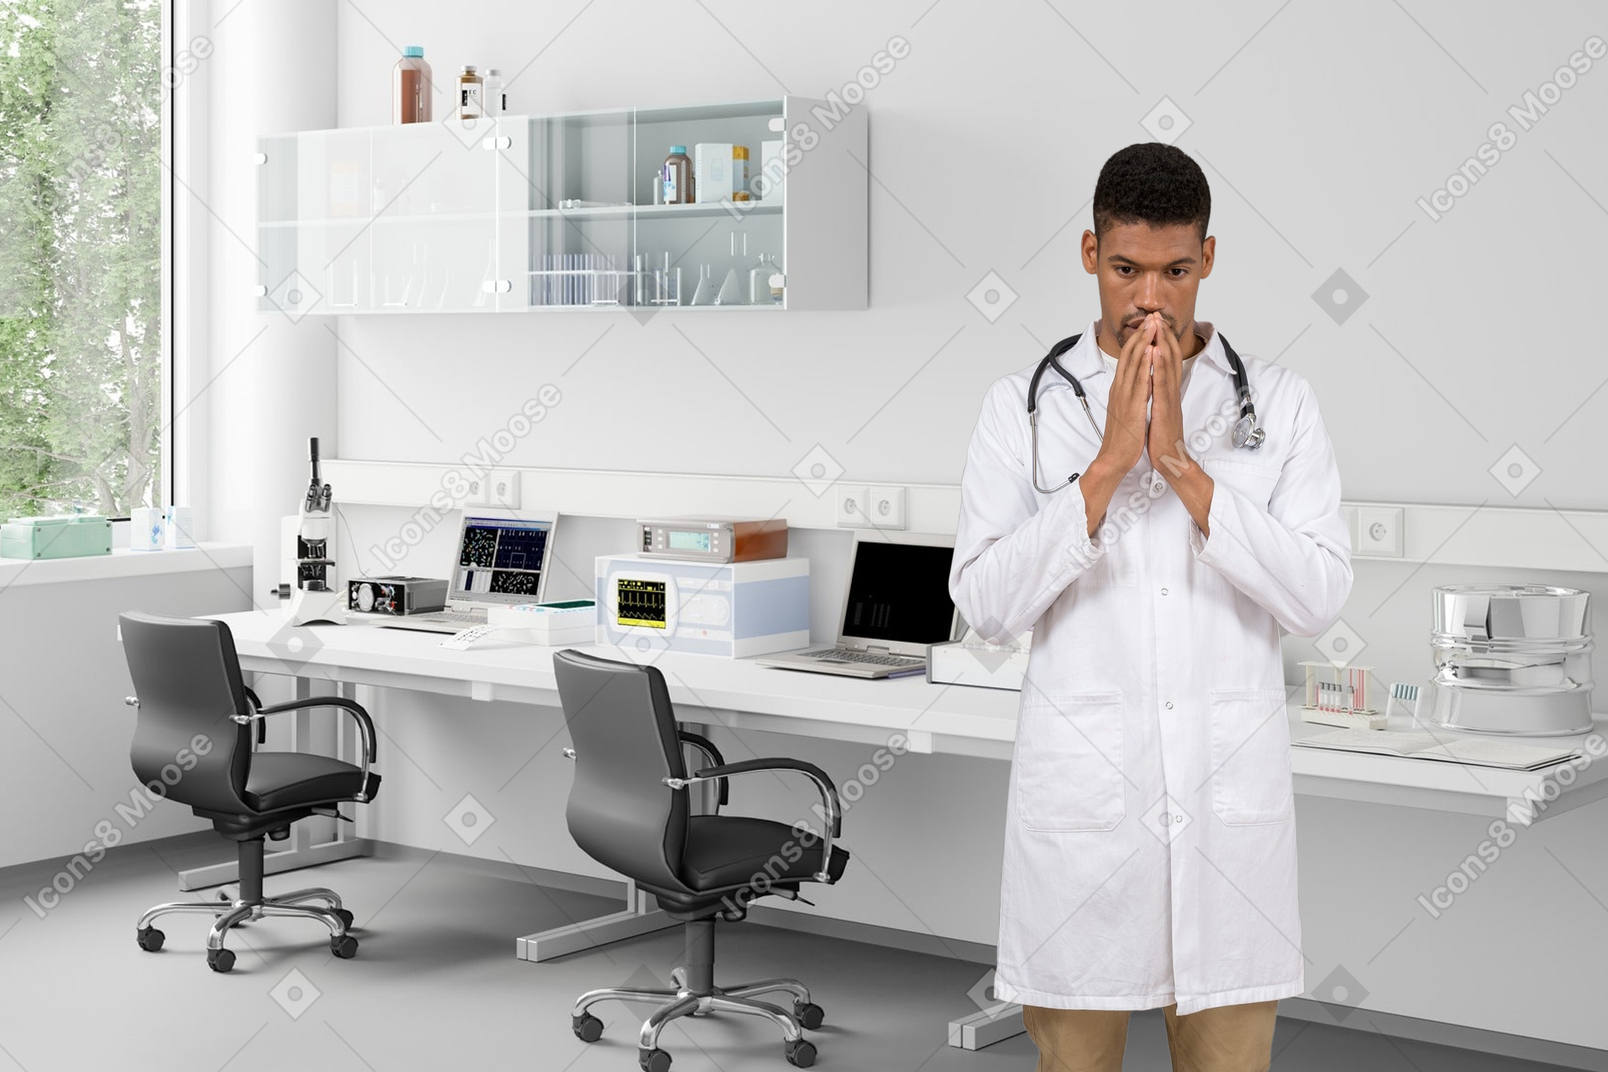 A man in a lab coat standing with folded hands in the lab